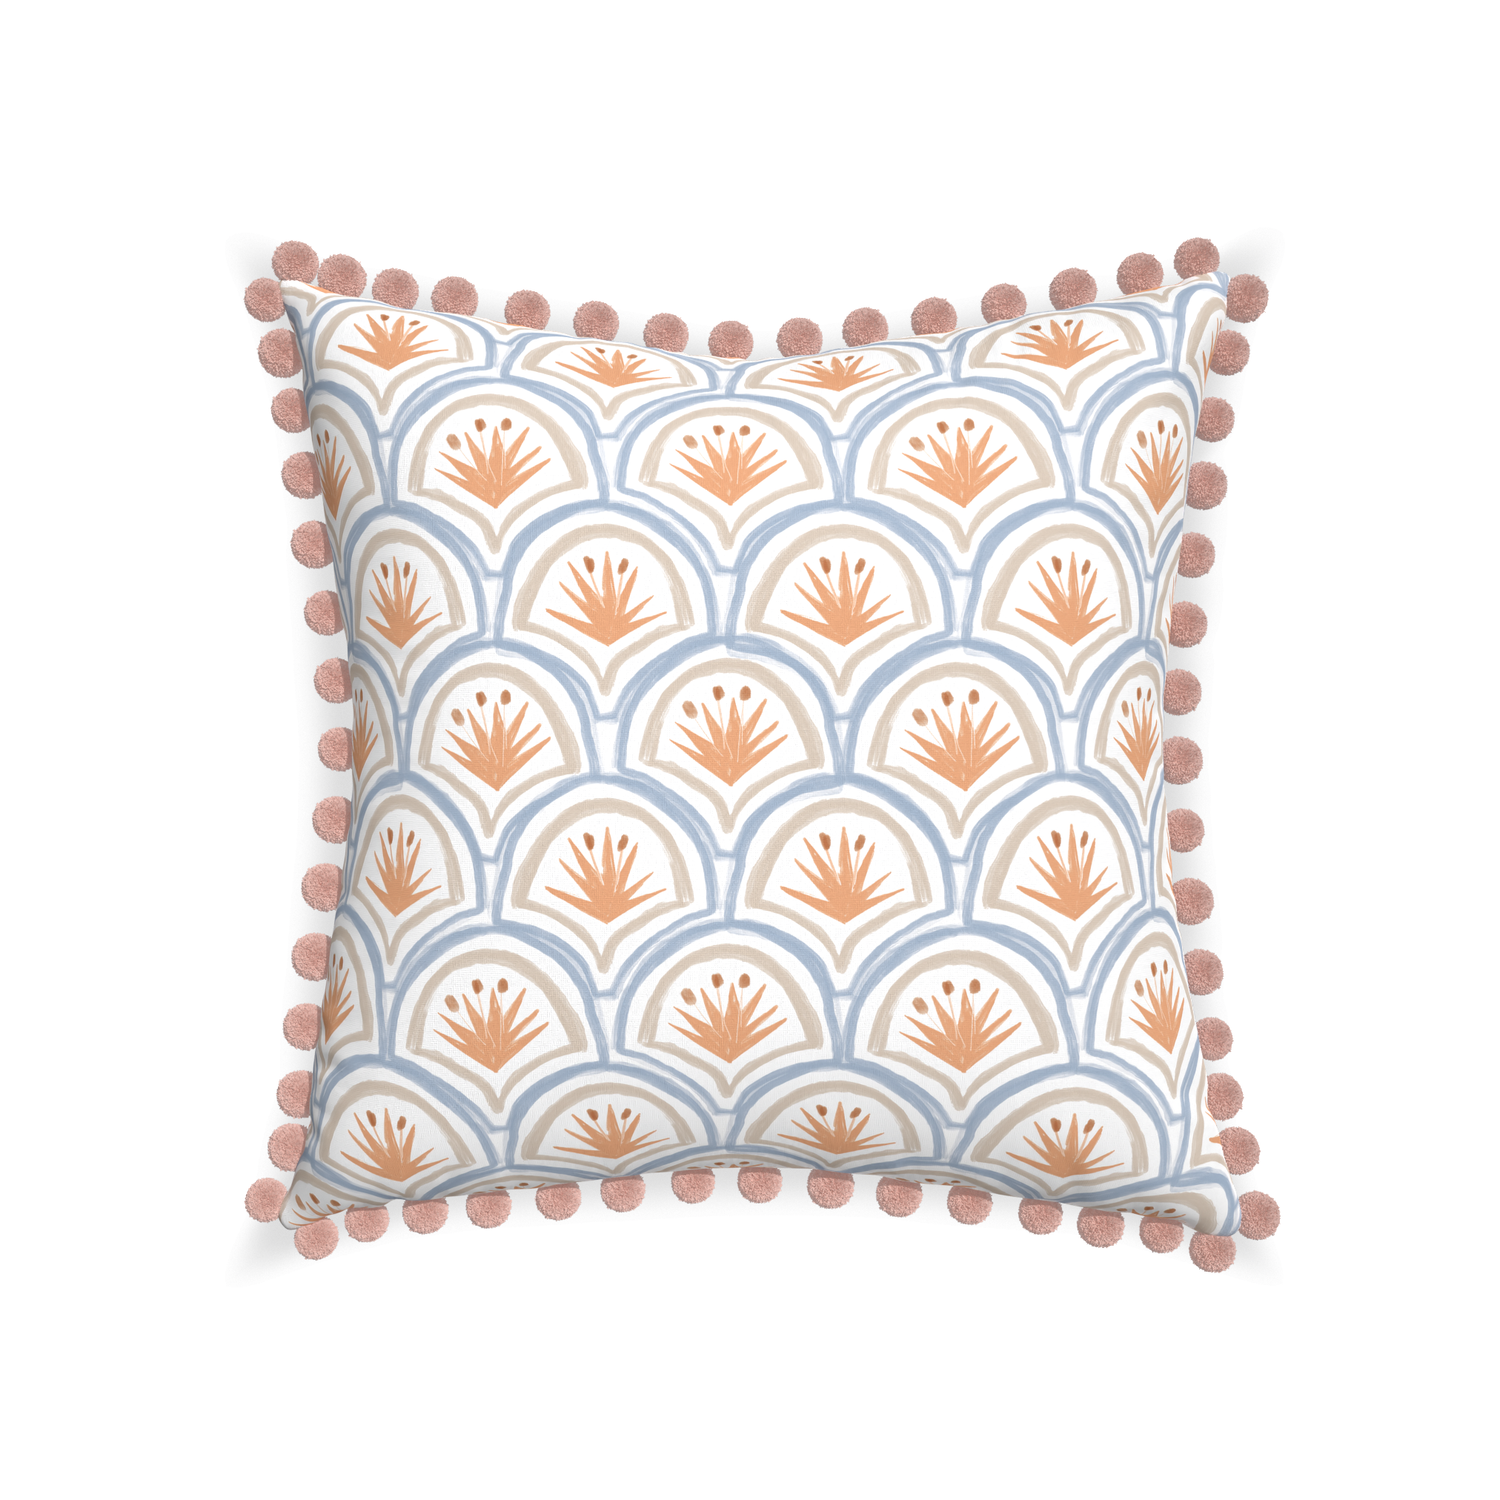 22-square thatcher apricot custom art deco palm patternpillow with rose pom pom on white background